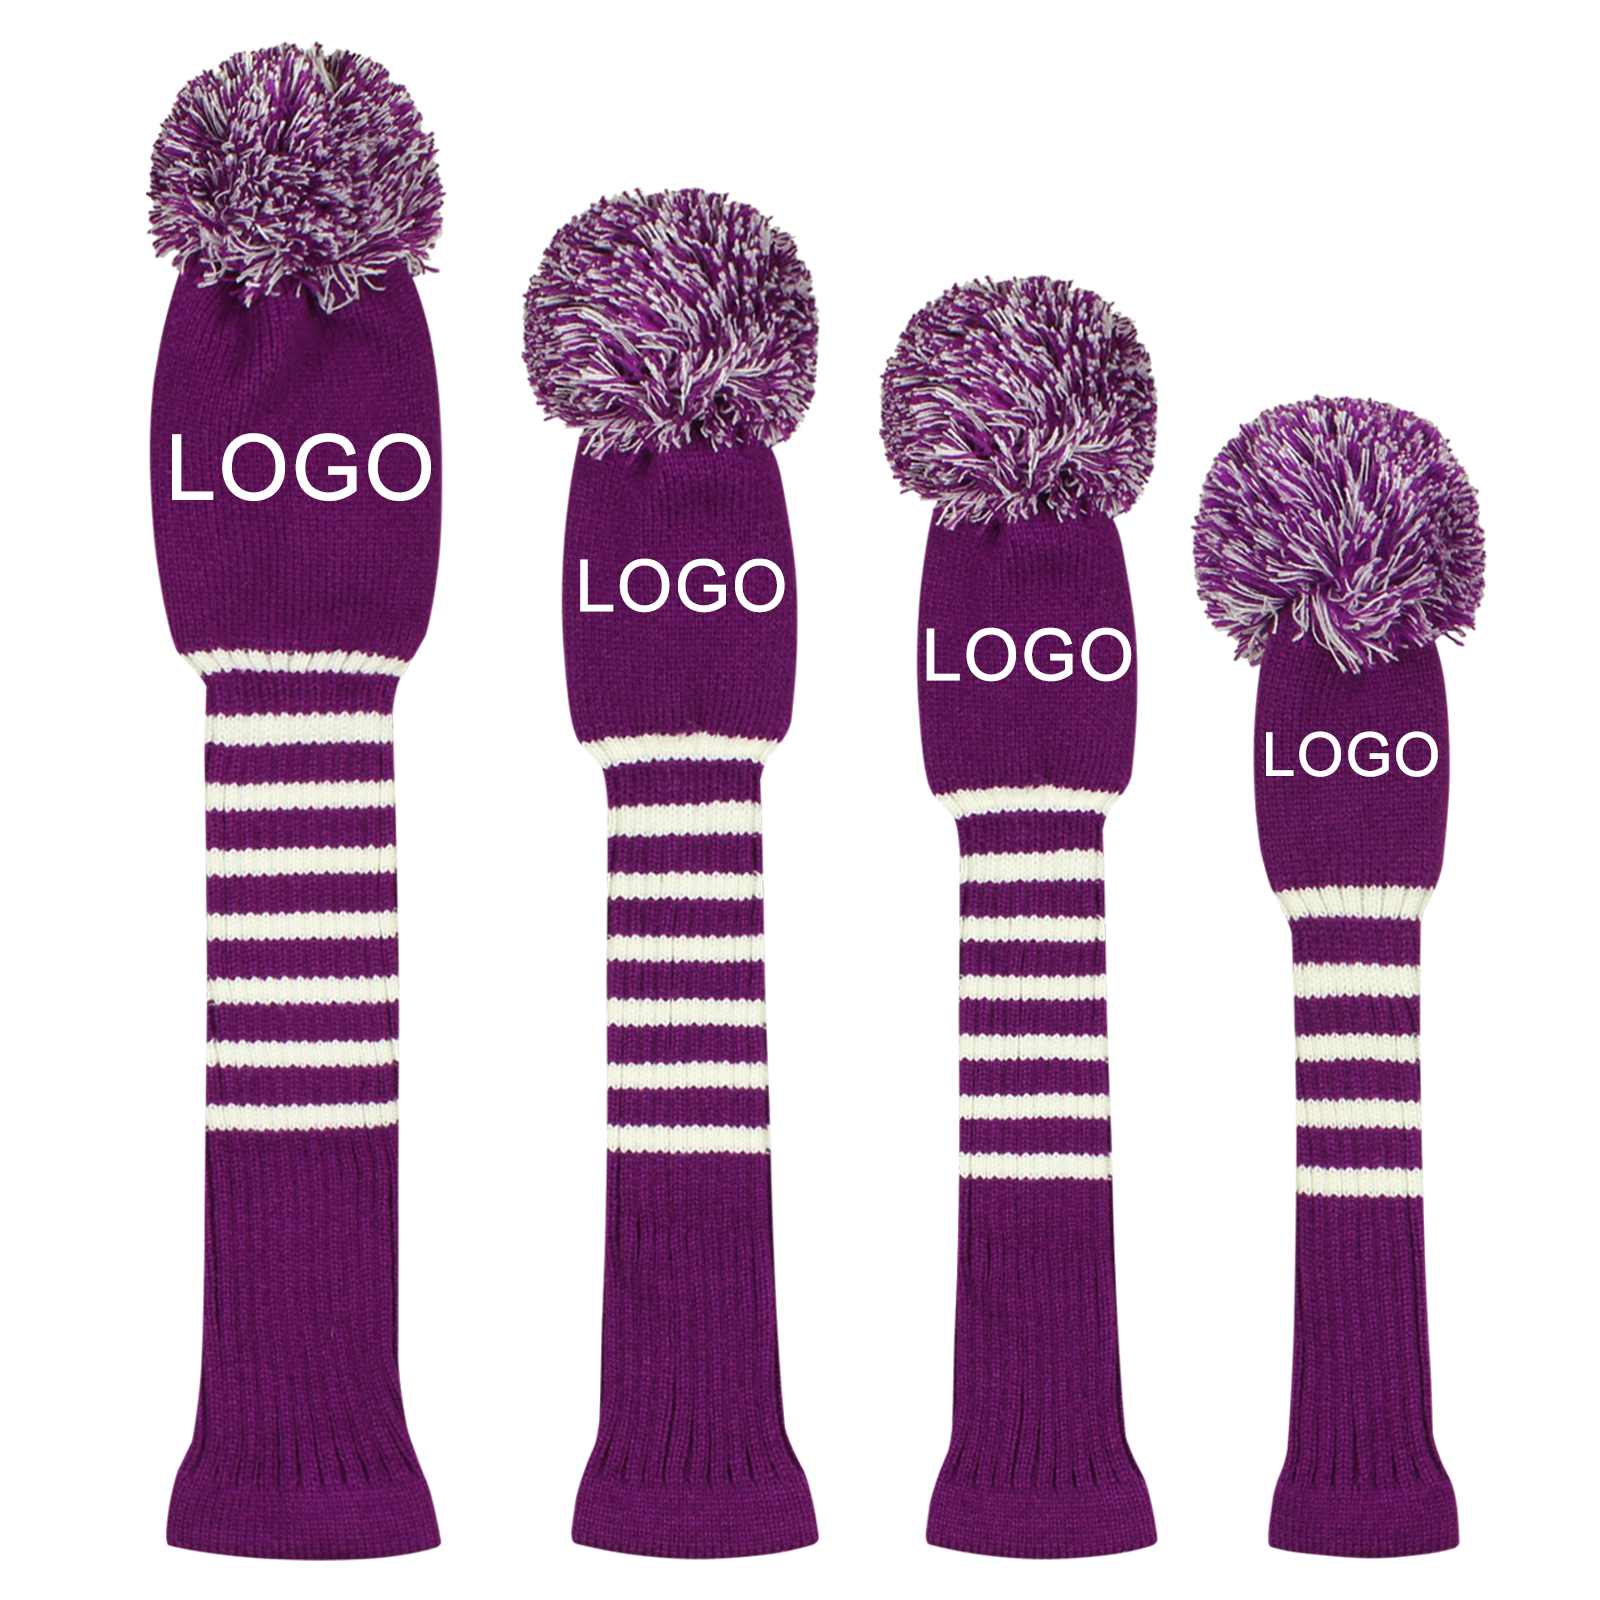 Scott Edward Custom Pom Pom Golf Head Covers Fit Max Drivers Fairways Hybrids/Utility with Rotating Number Tags (Purple)